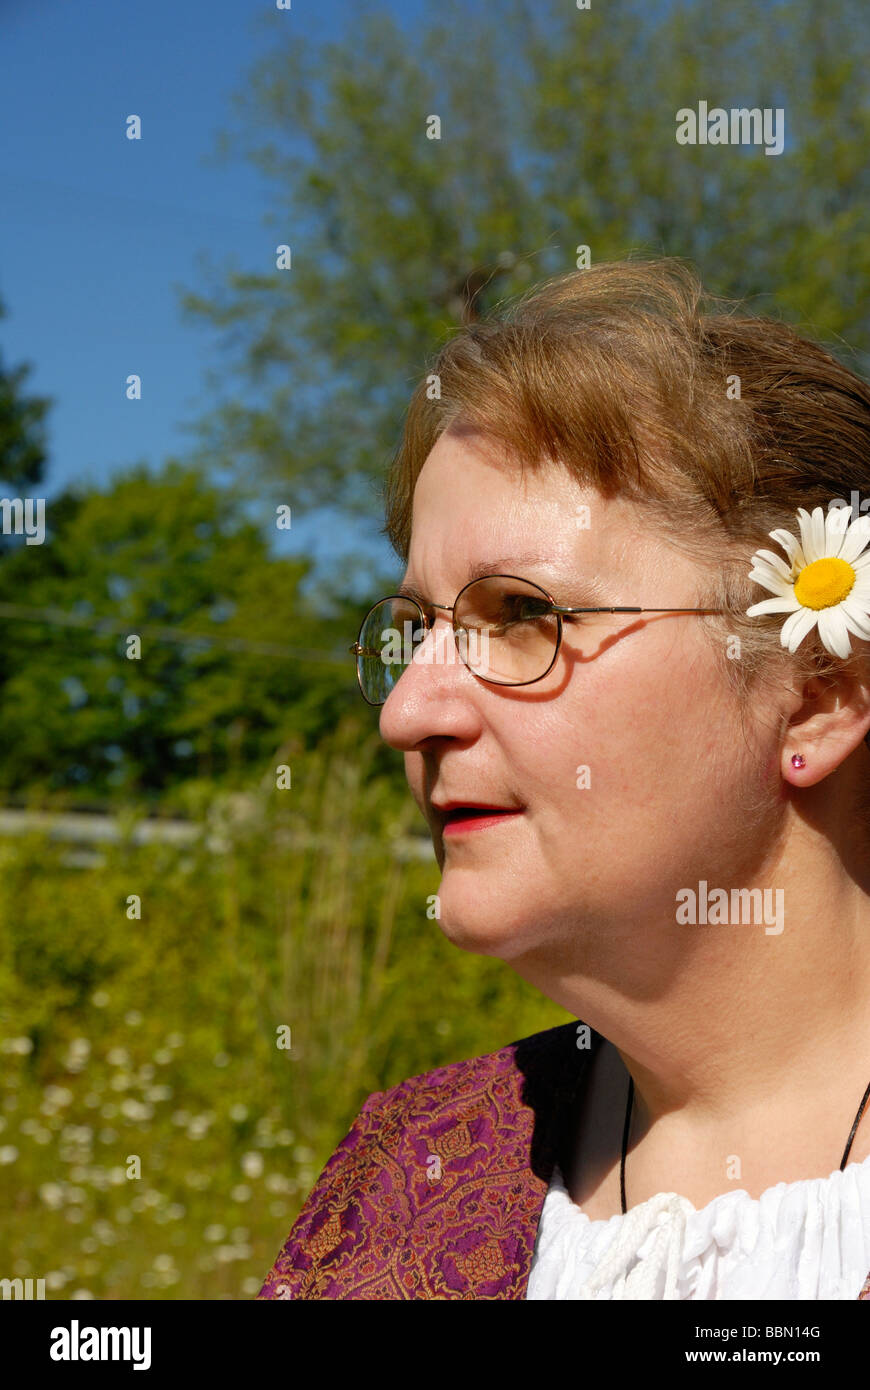 woman in field with flower in her hair wearing glasses Stock Photo